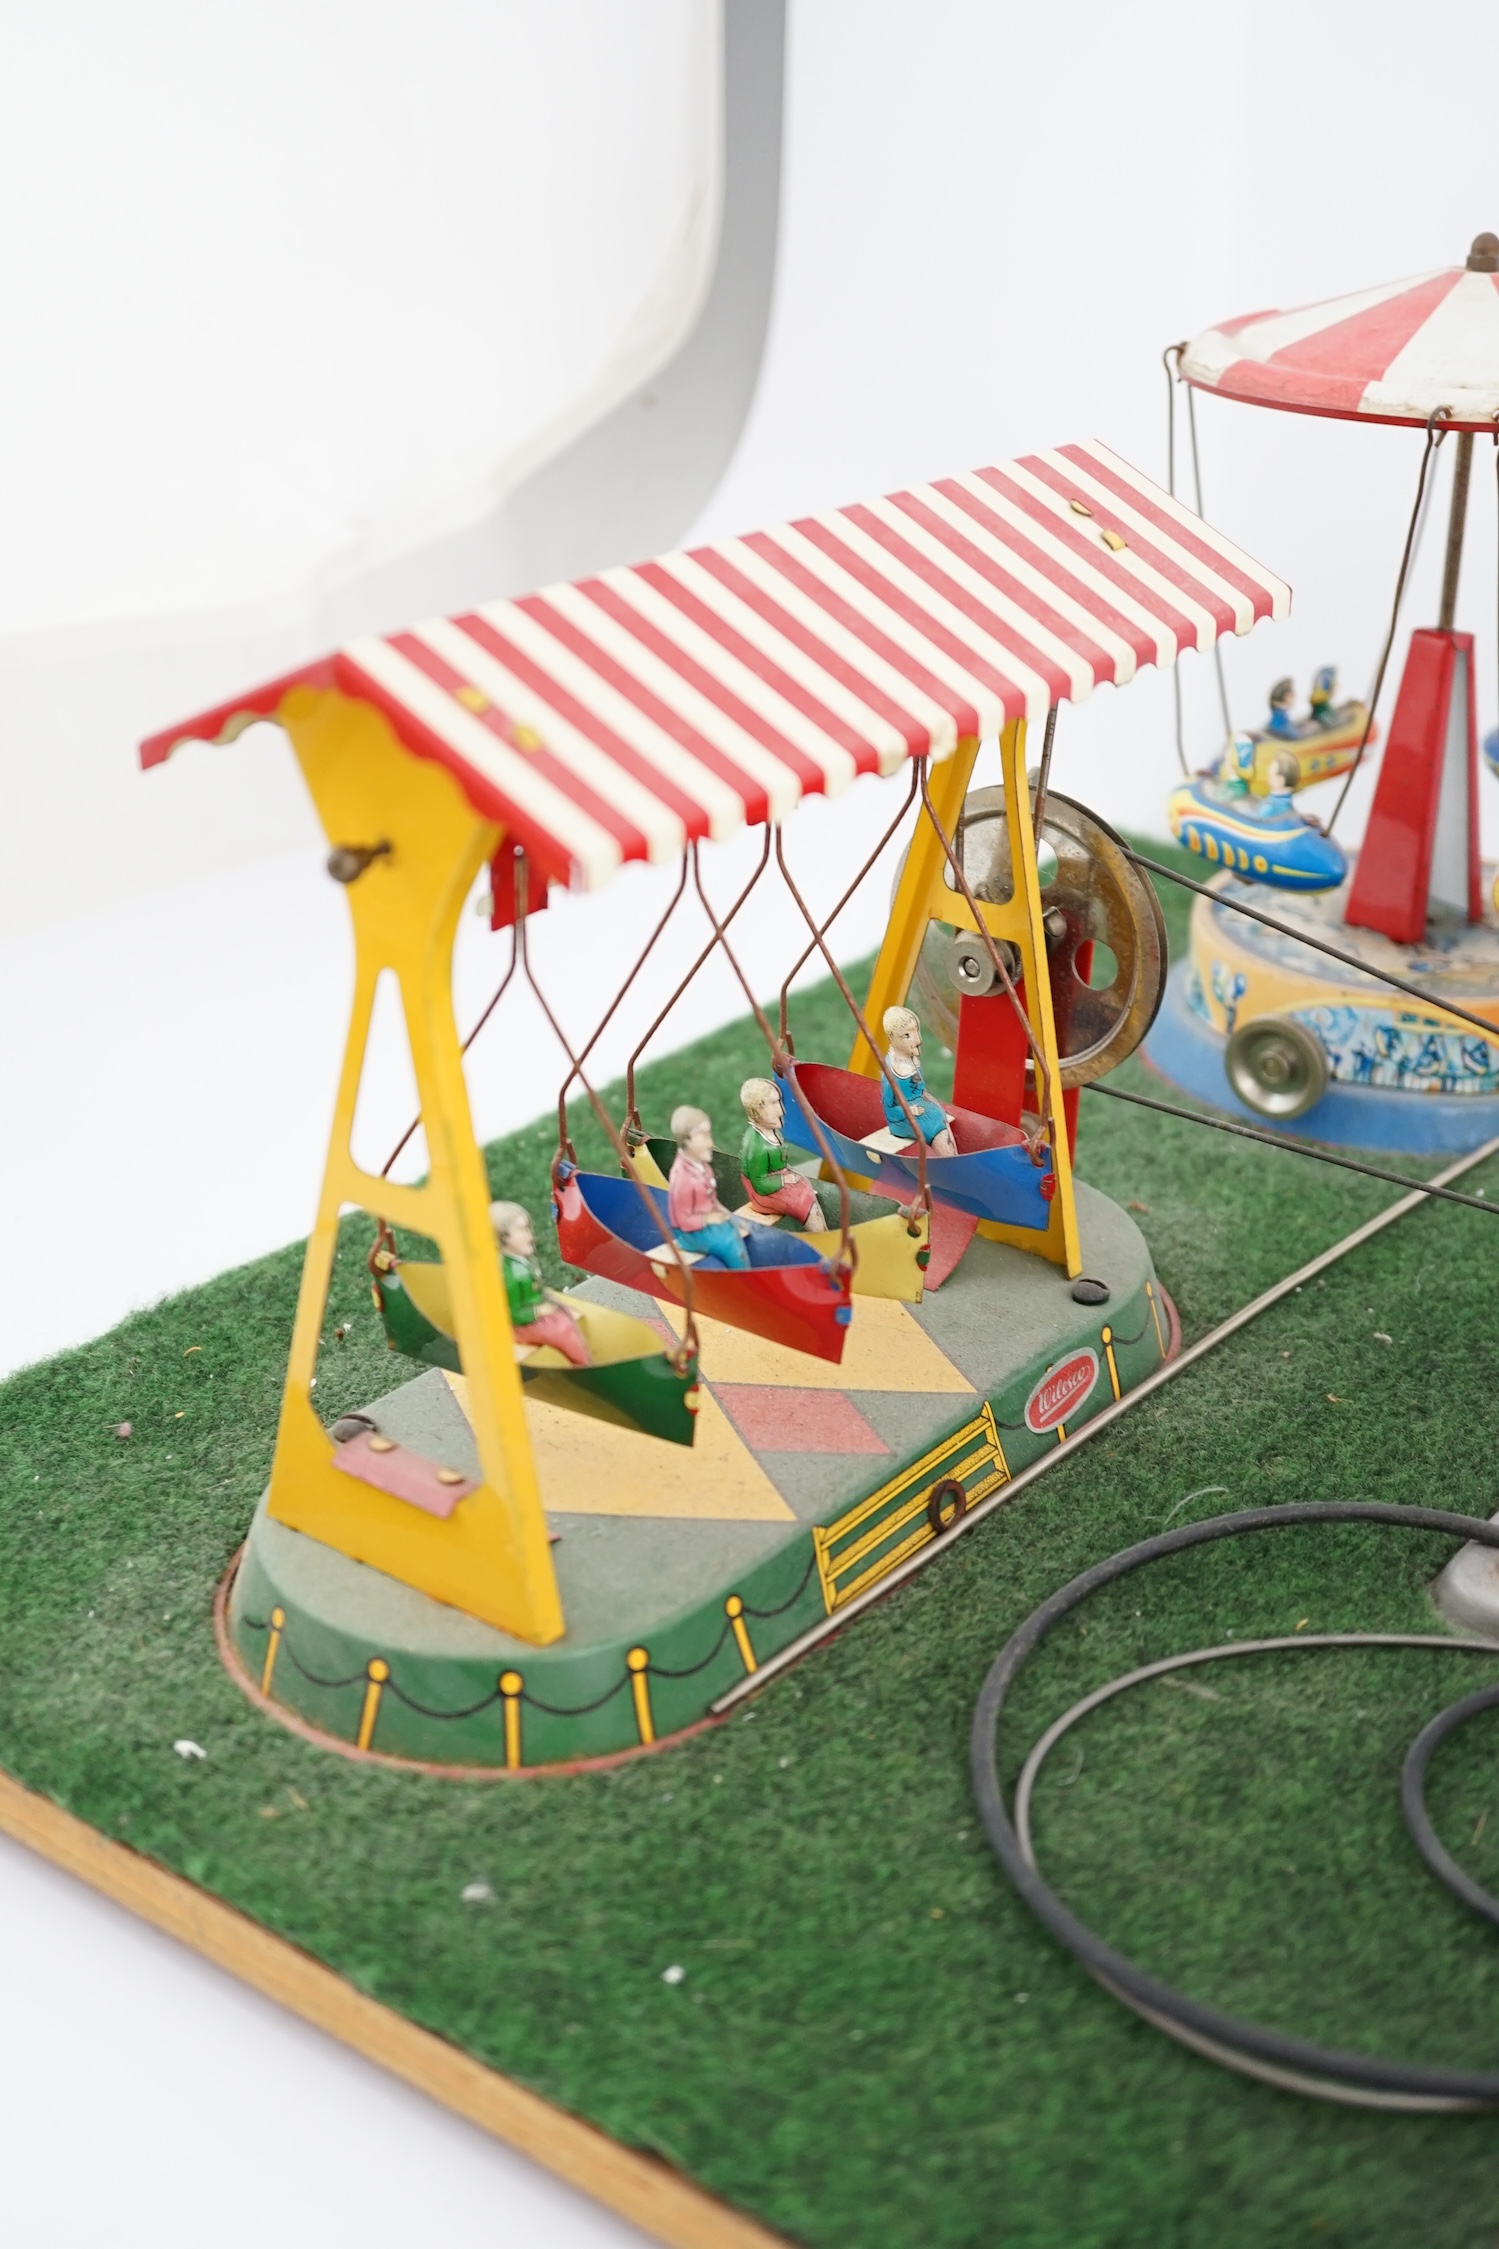 A Wilesco live steam fairground diorama, comprising a D430 pellet fired traction engine, powering a pulley and gear assembly, in turn running three tinplate fairground rides, mounted on a plywood sheet topped with grass